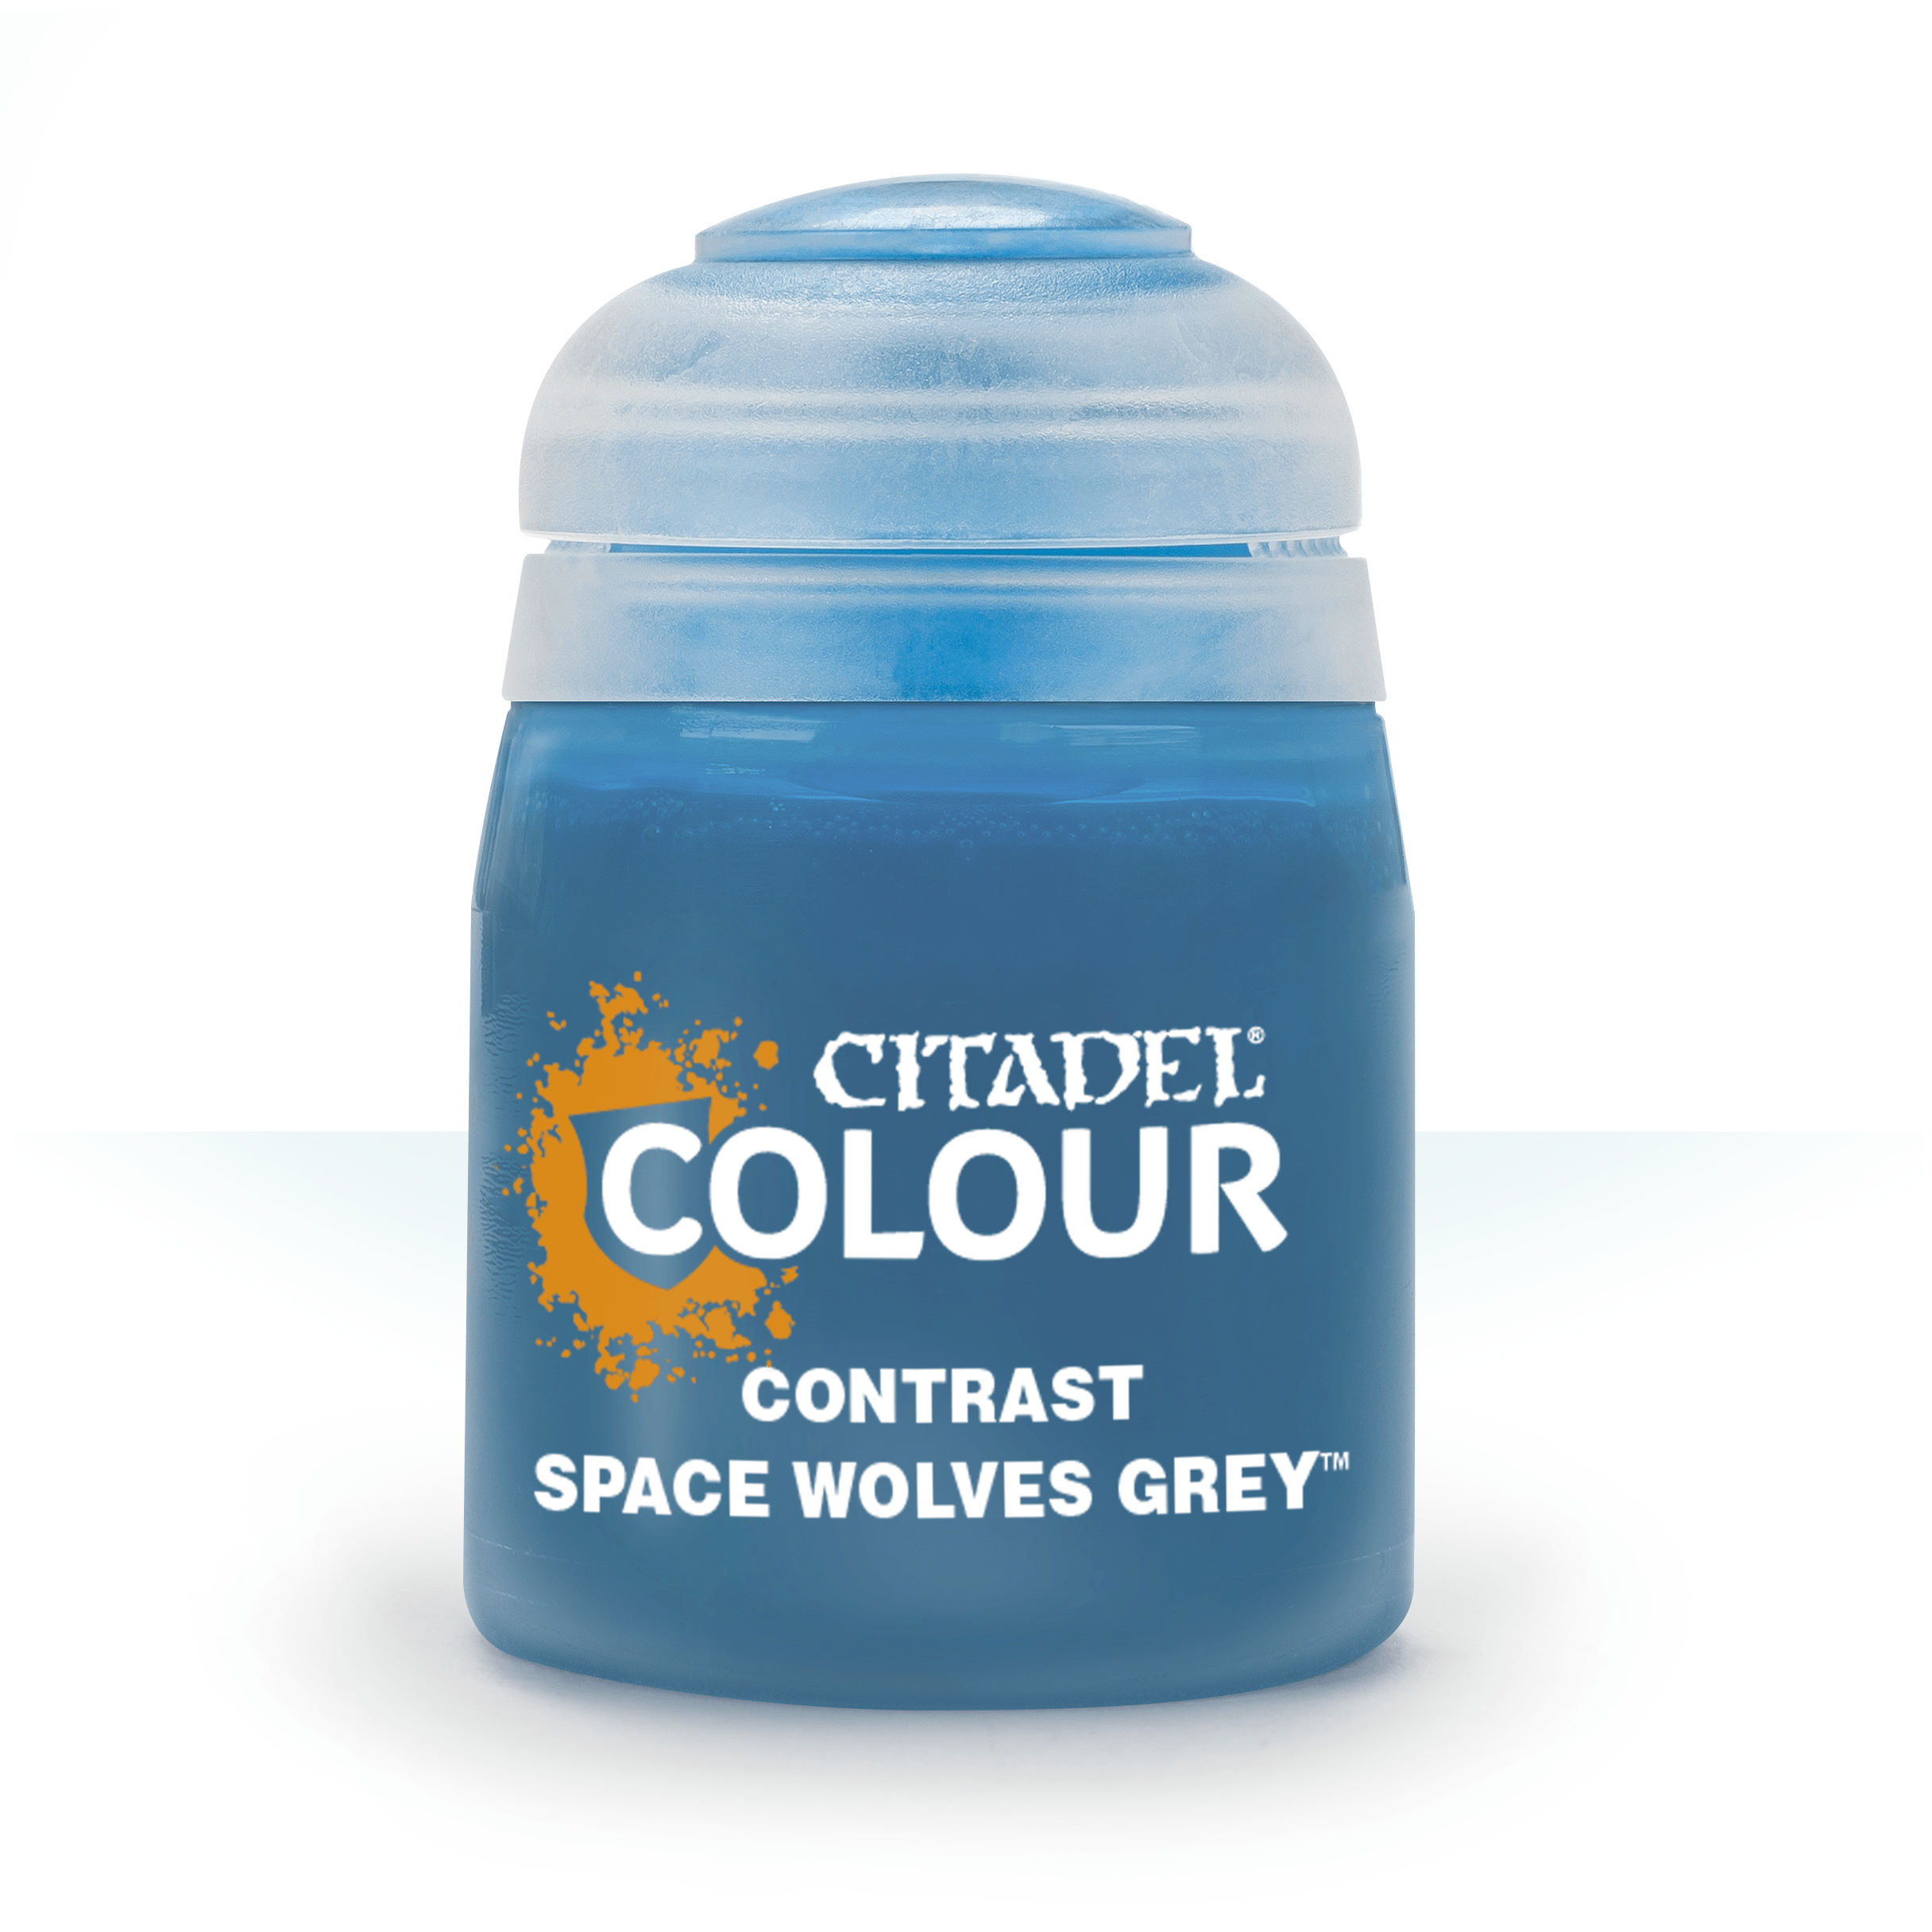 Citadel: Space Wolves Grey